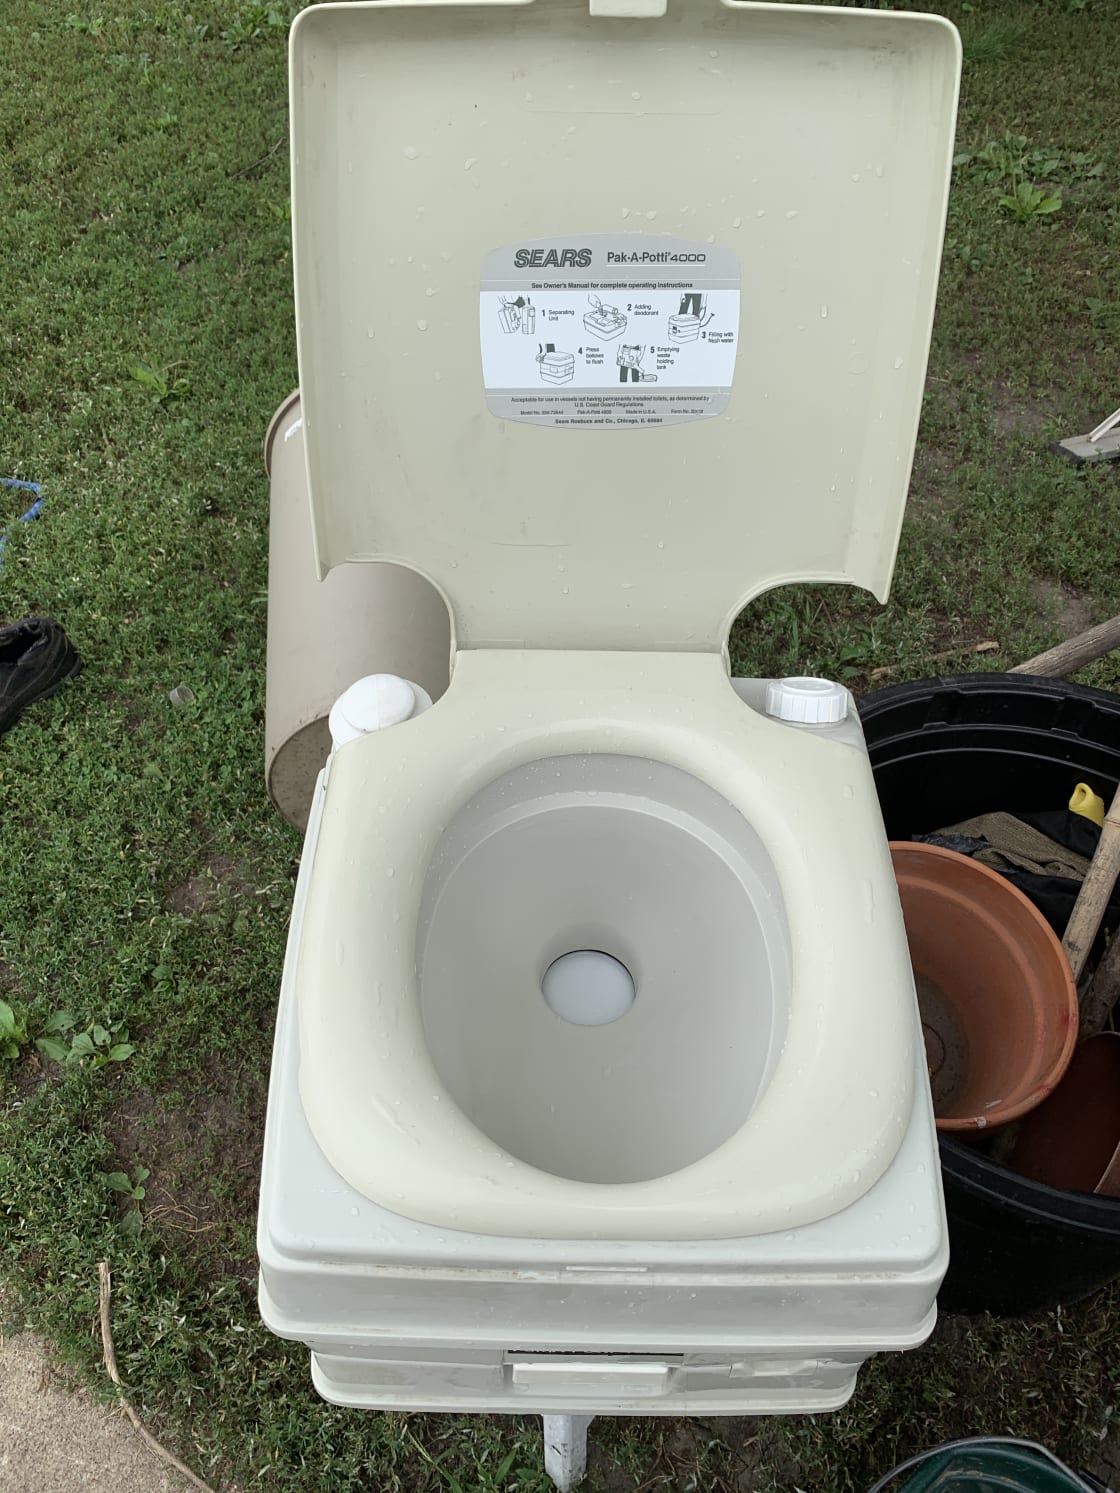 We have one PortaPotty available, with hand sanitizer, disinfectant spray, paper towels and sanitary wipes available. If requested we also have camp toilet and privacy tent available for use.